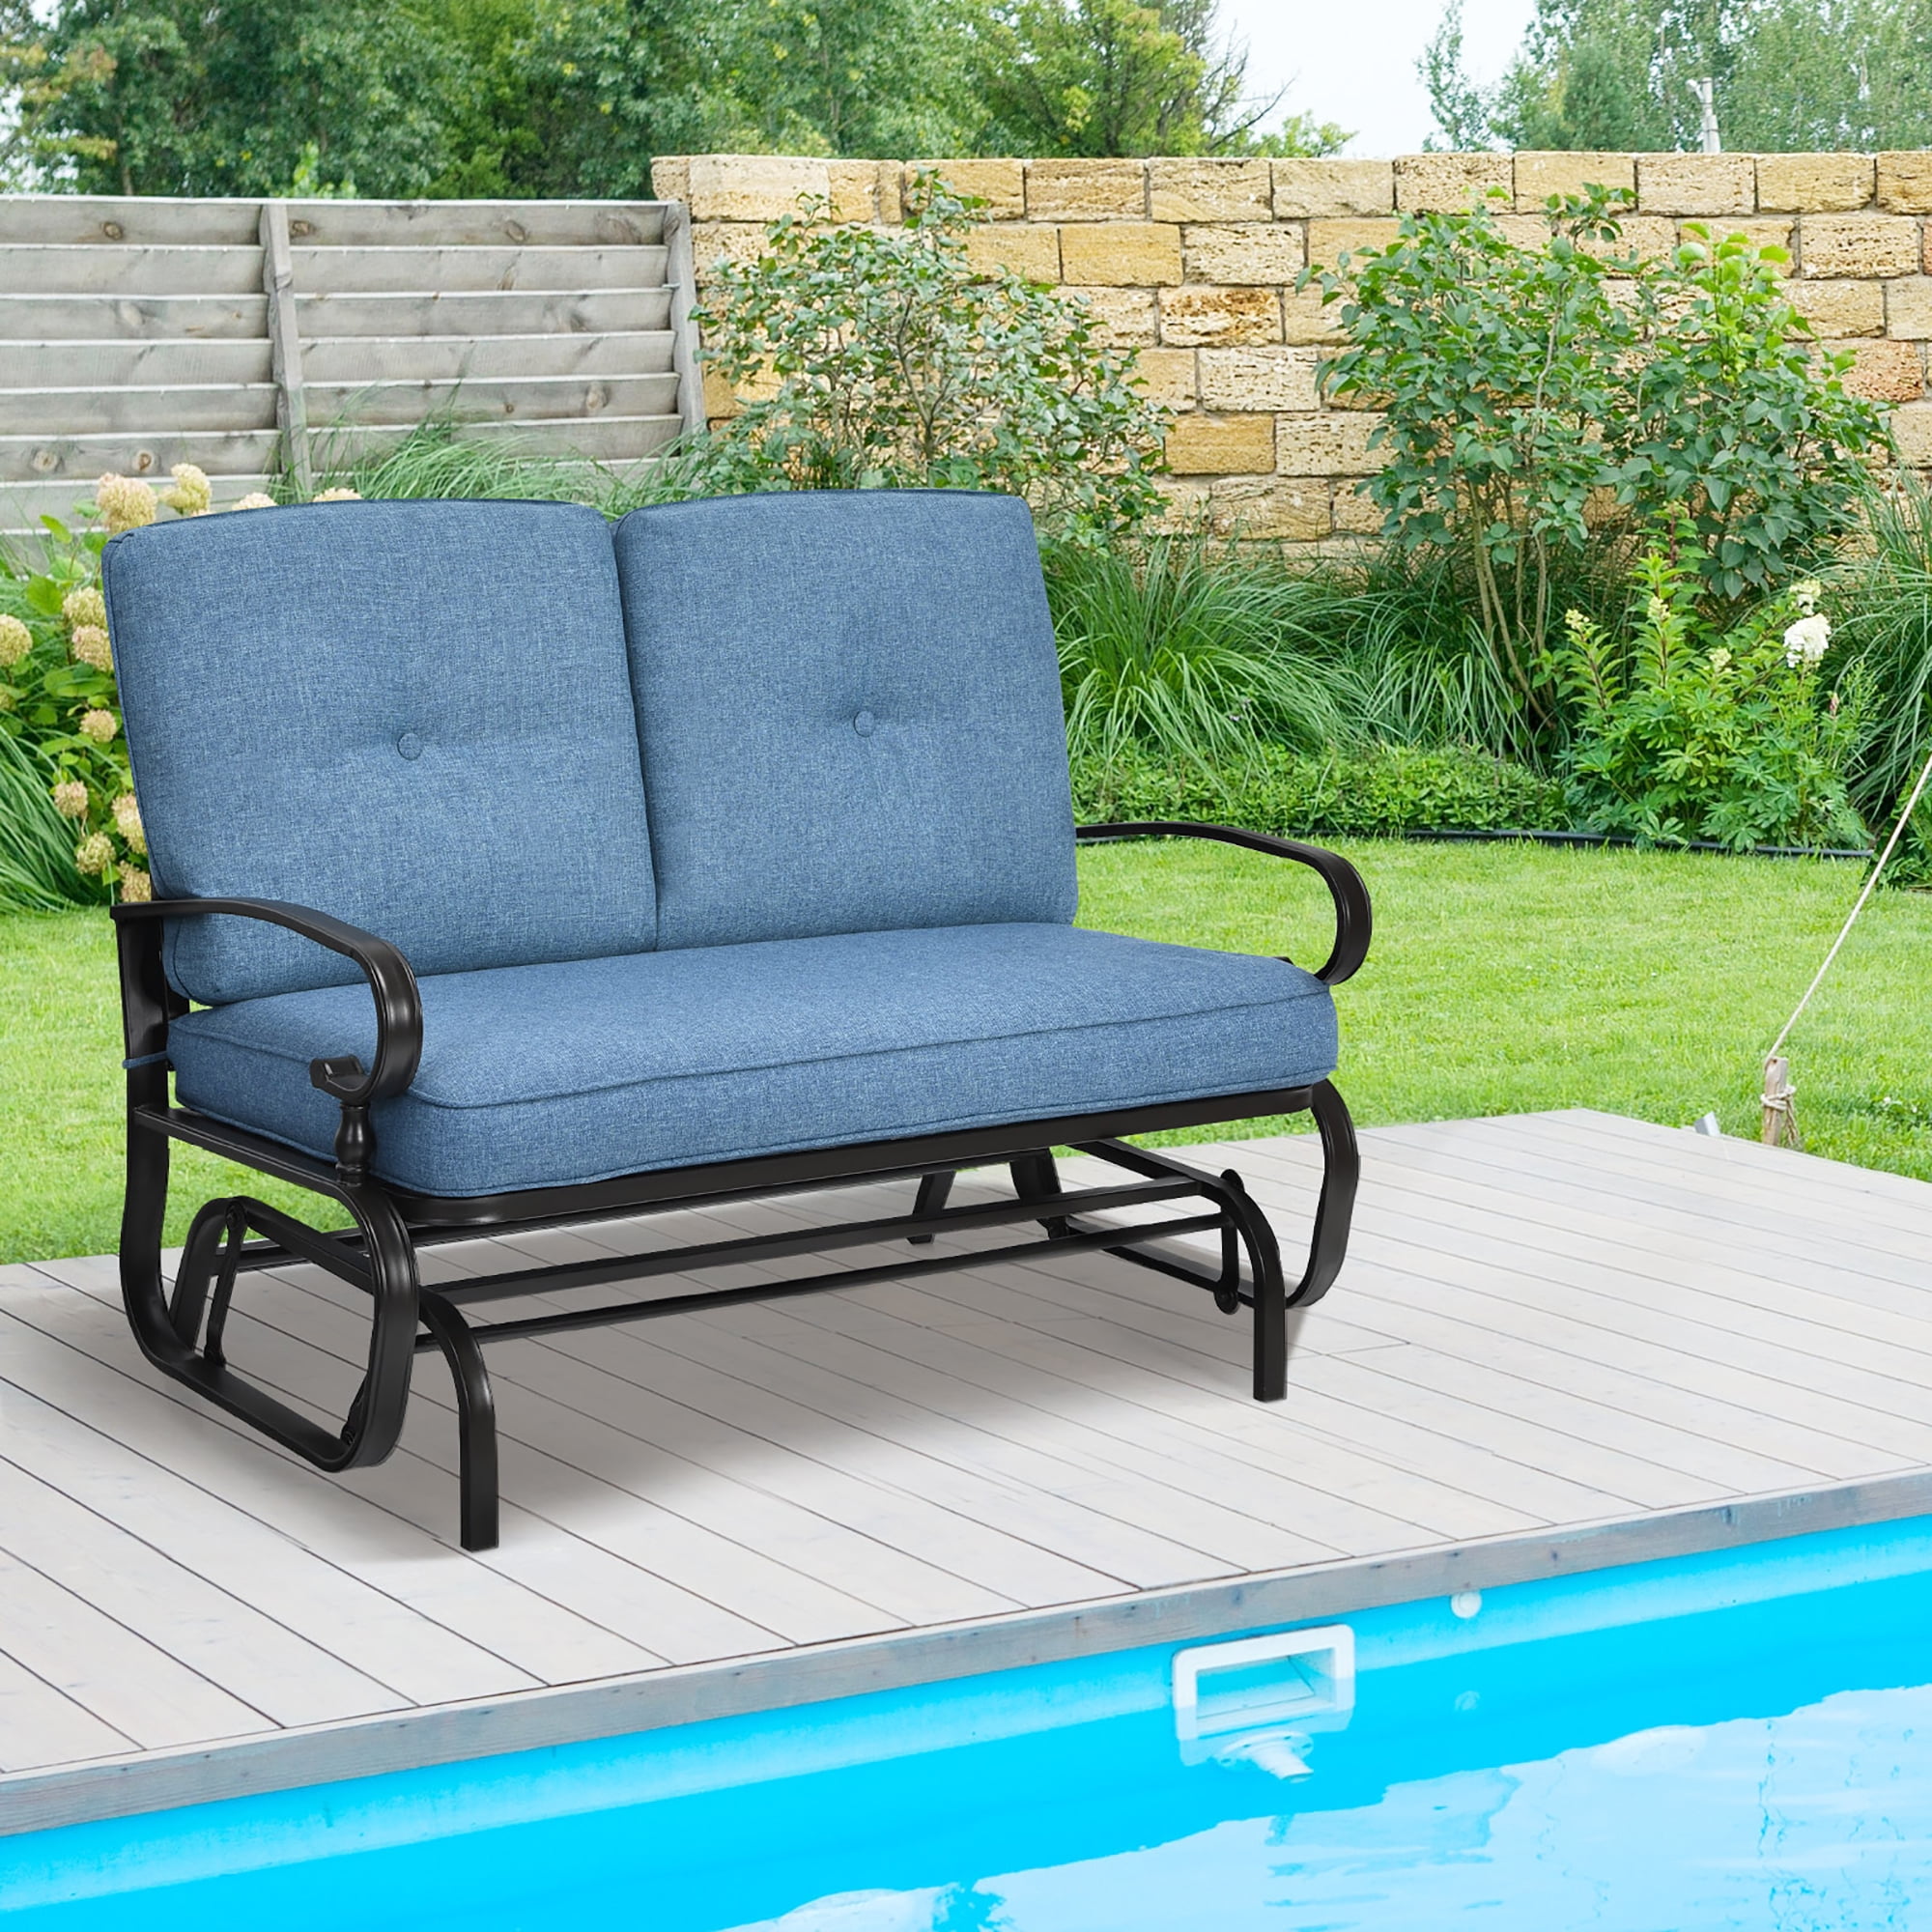 Patio Glider Rocking Bench Double 2 Person Chair Loveseat Armchair Backyard New 